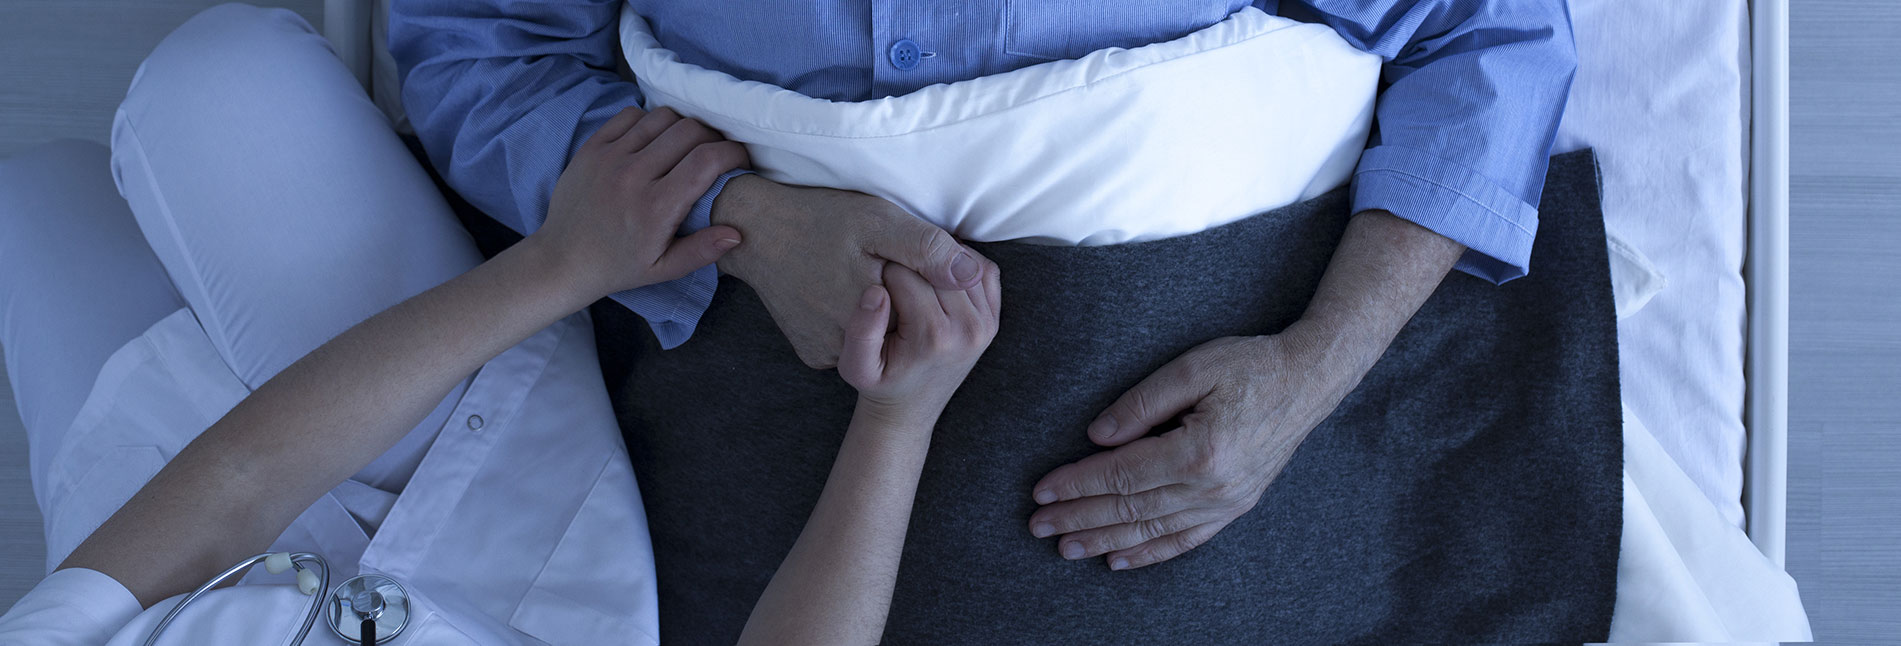 What Qualifies For In-Patient Hospice Care?